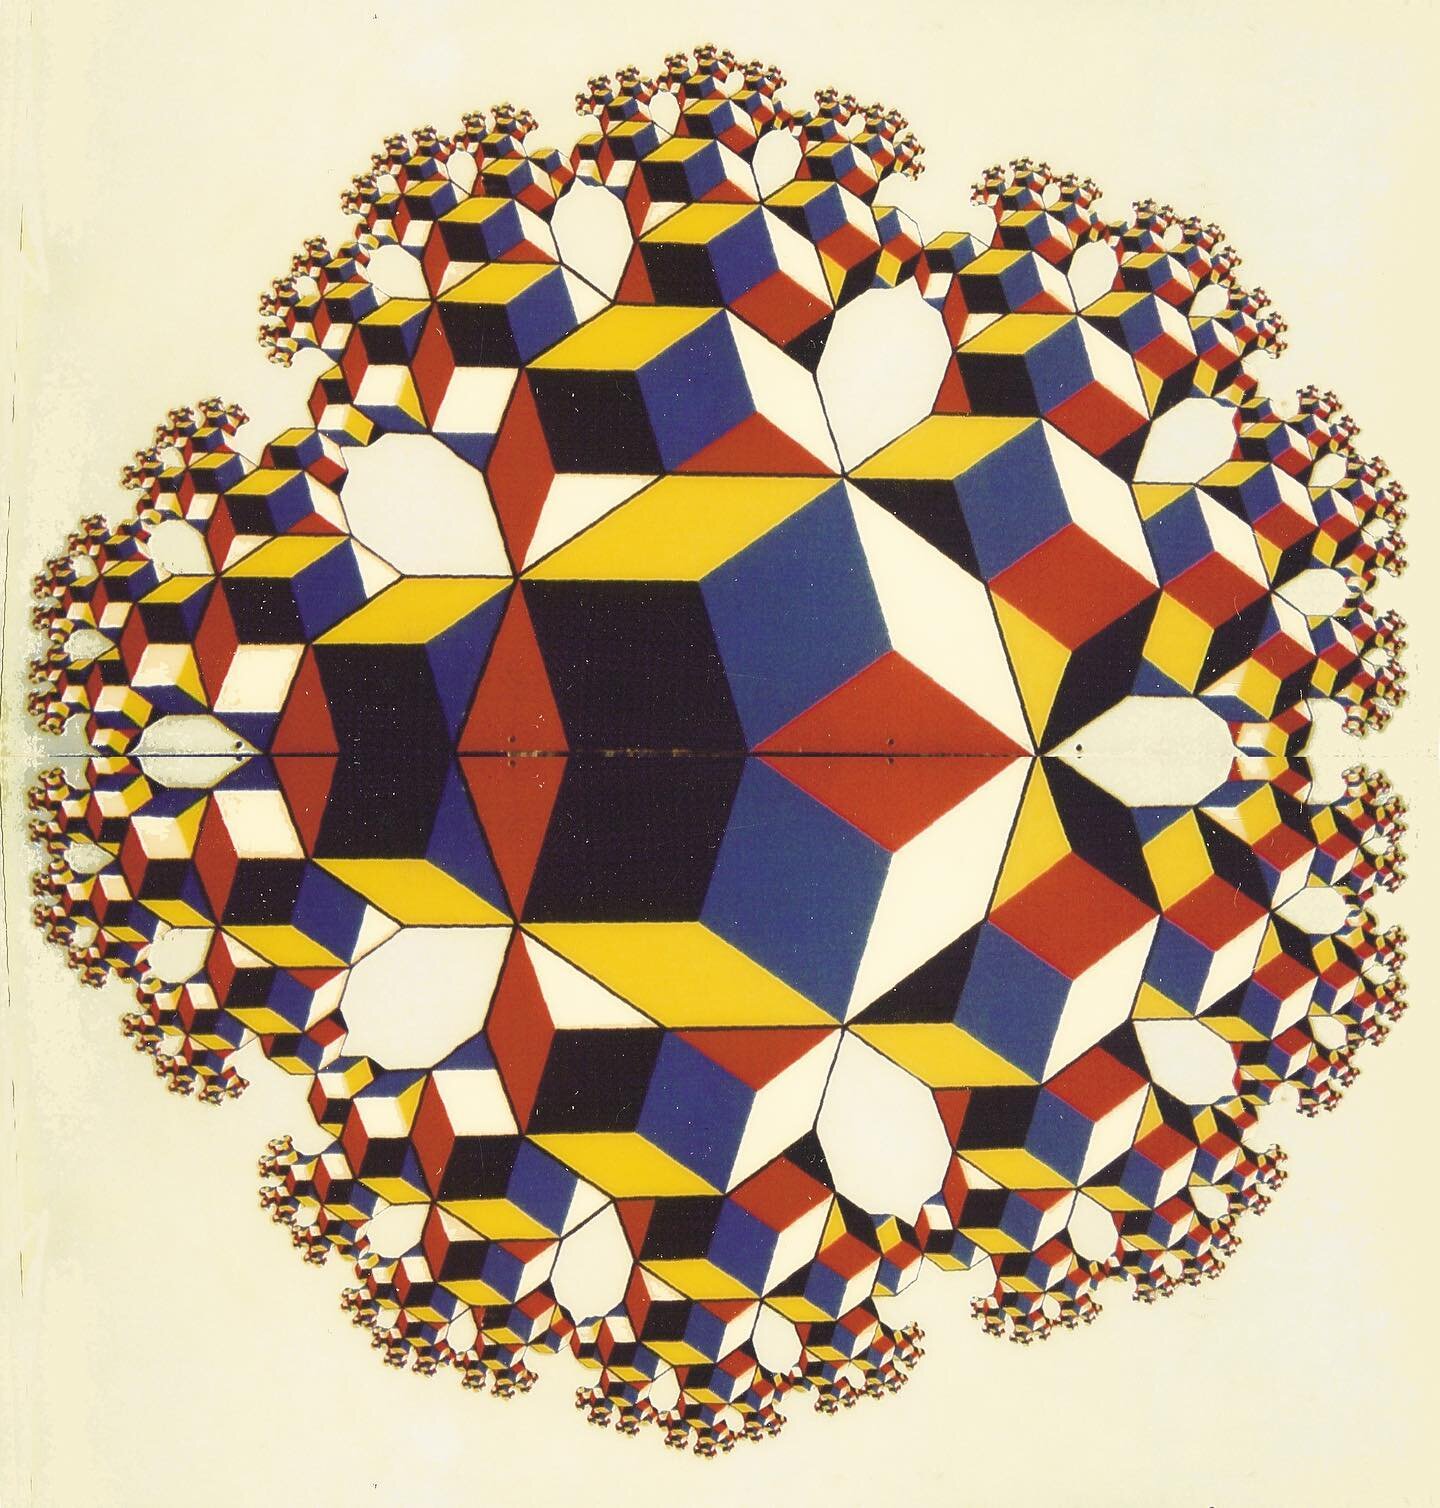 Western mathematicians have been intrigued by never-ending patterns since at least the 17th century, but it wasn&rsquo;t until 1975 that Benoit Madelbrot coined the term &ldquo;fractal.&rdquo;

In 1970 Clark created this painting to be used as a sign